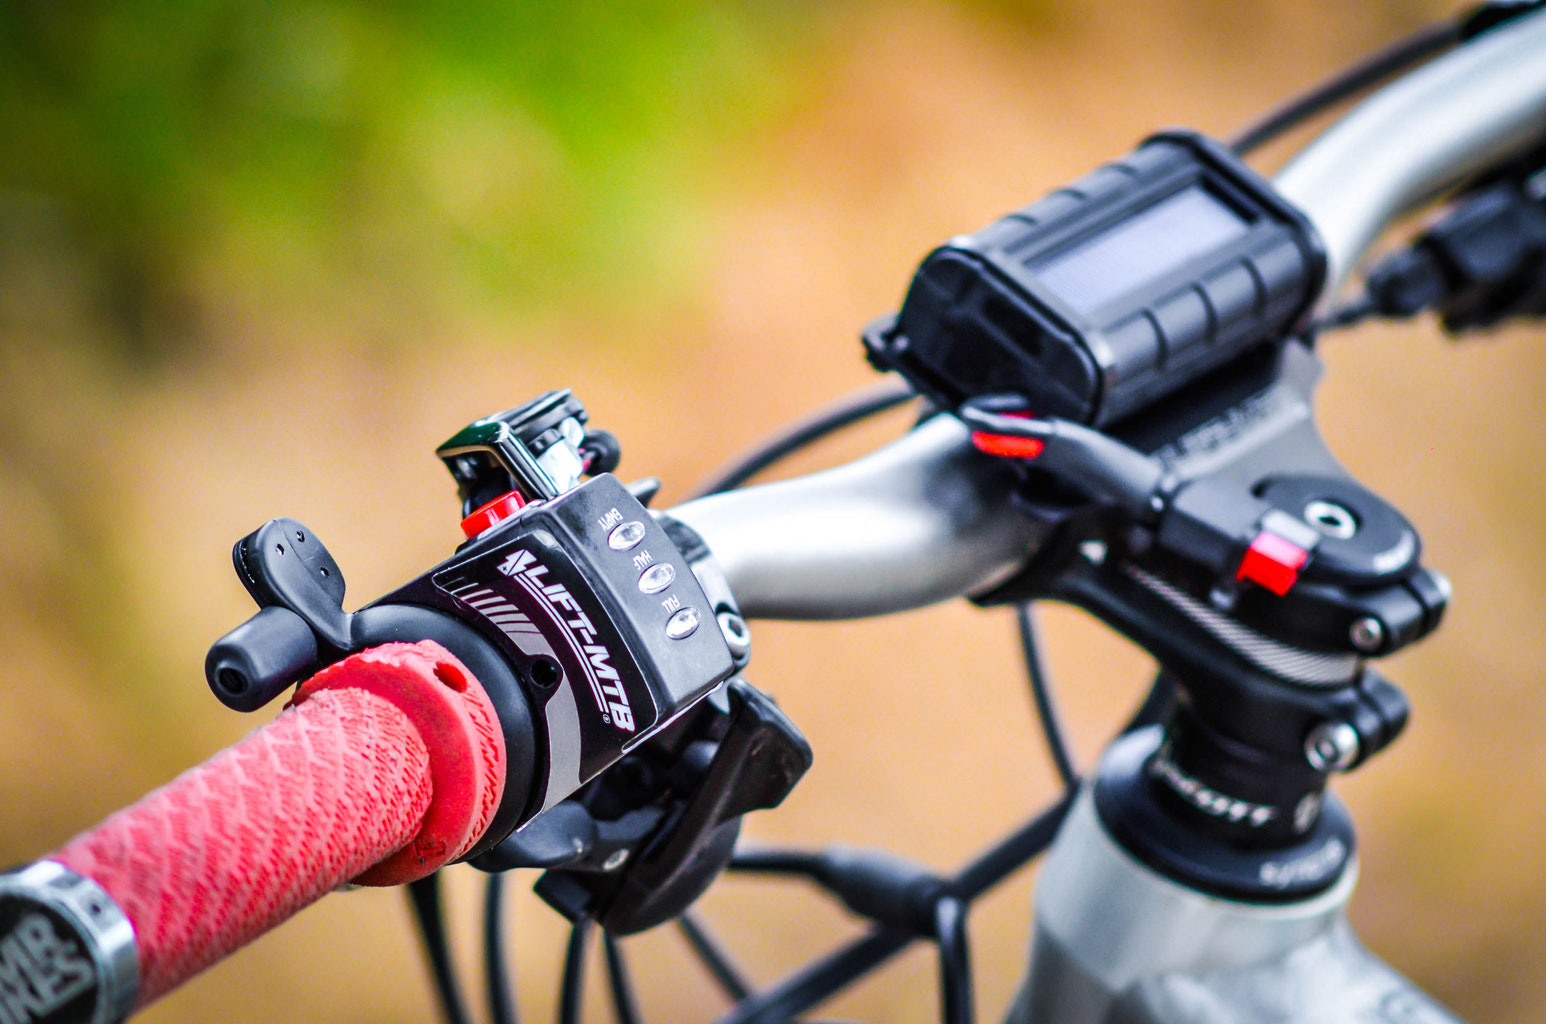 Close up shot of an electric mountain bike model with red twist throttle